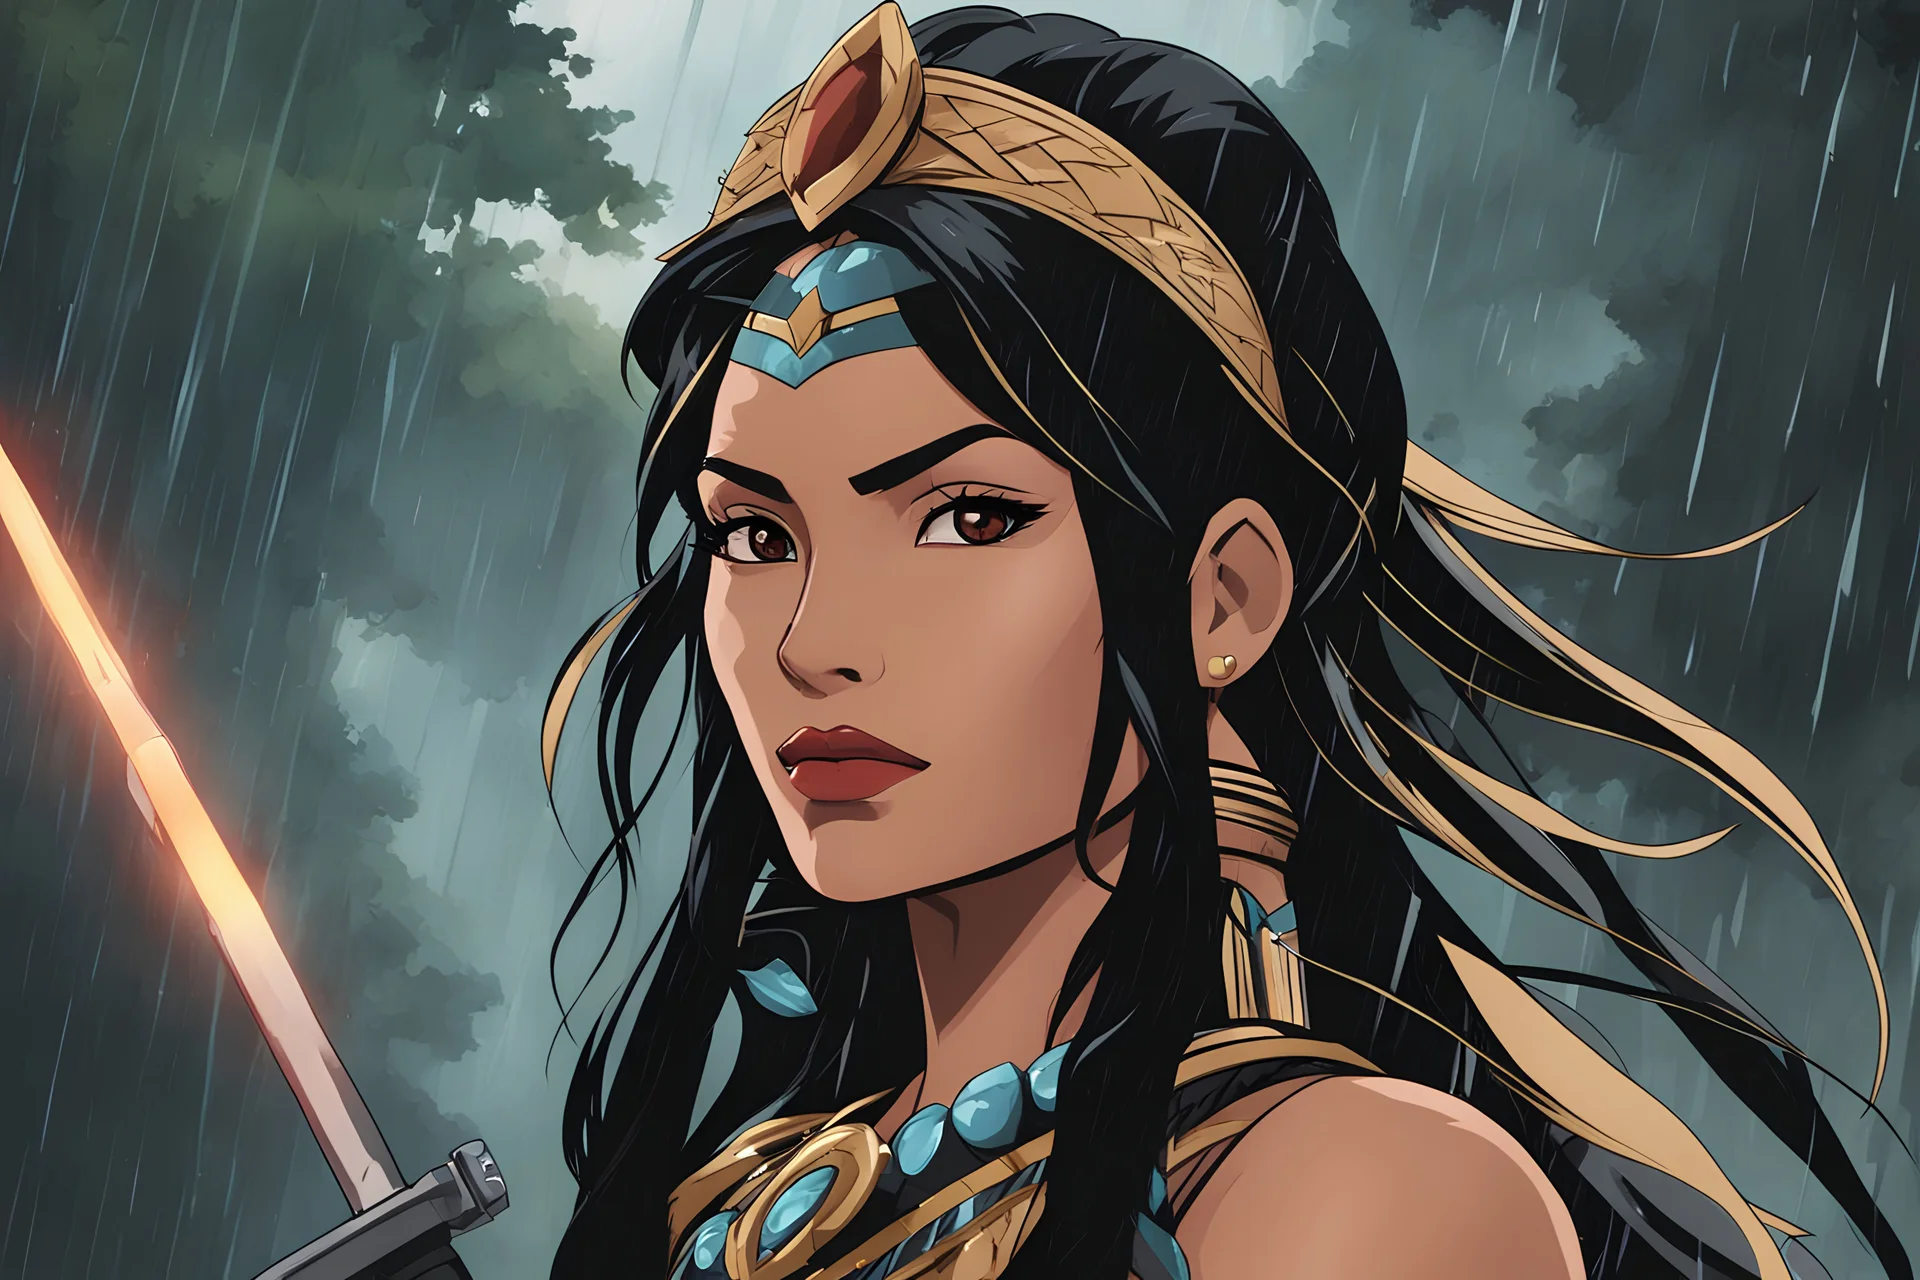 Badass pocahontas in the style of berserk in 8k solo leveling shadow artstyle, machine them, close picture, rain, intricate details, highly detailed, high details, detailed portrait, masterpiece,ultra detailed, ultra quality